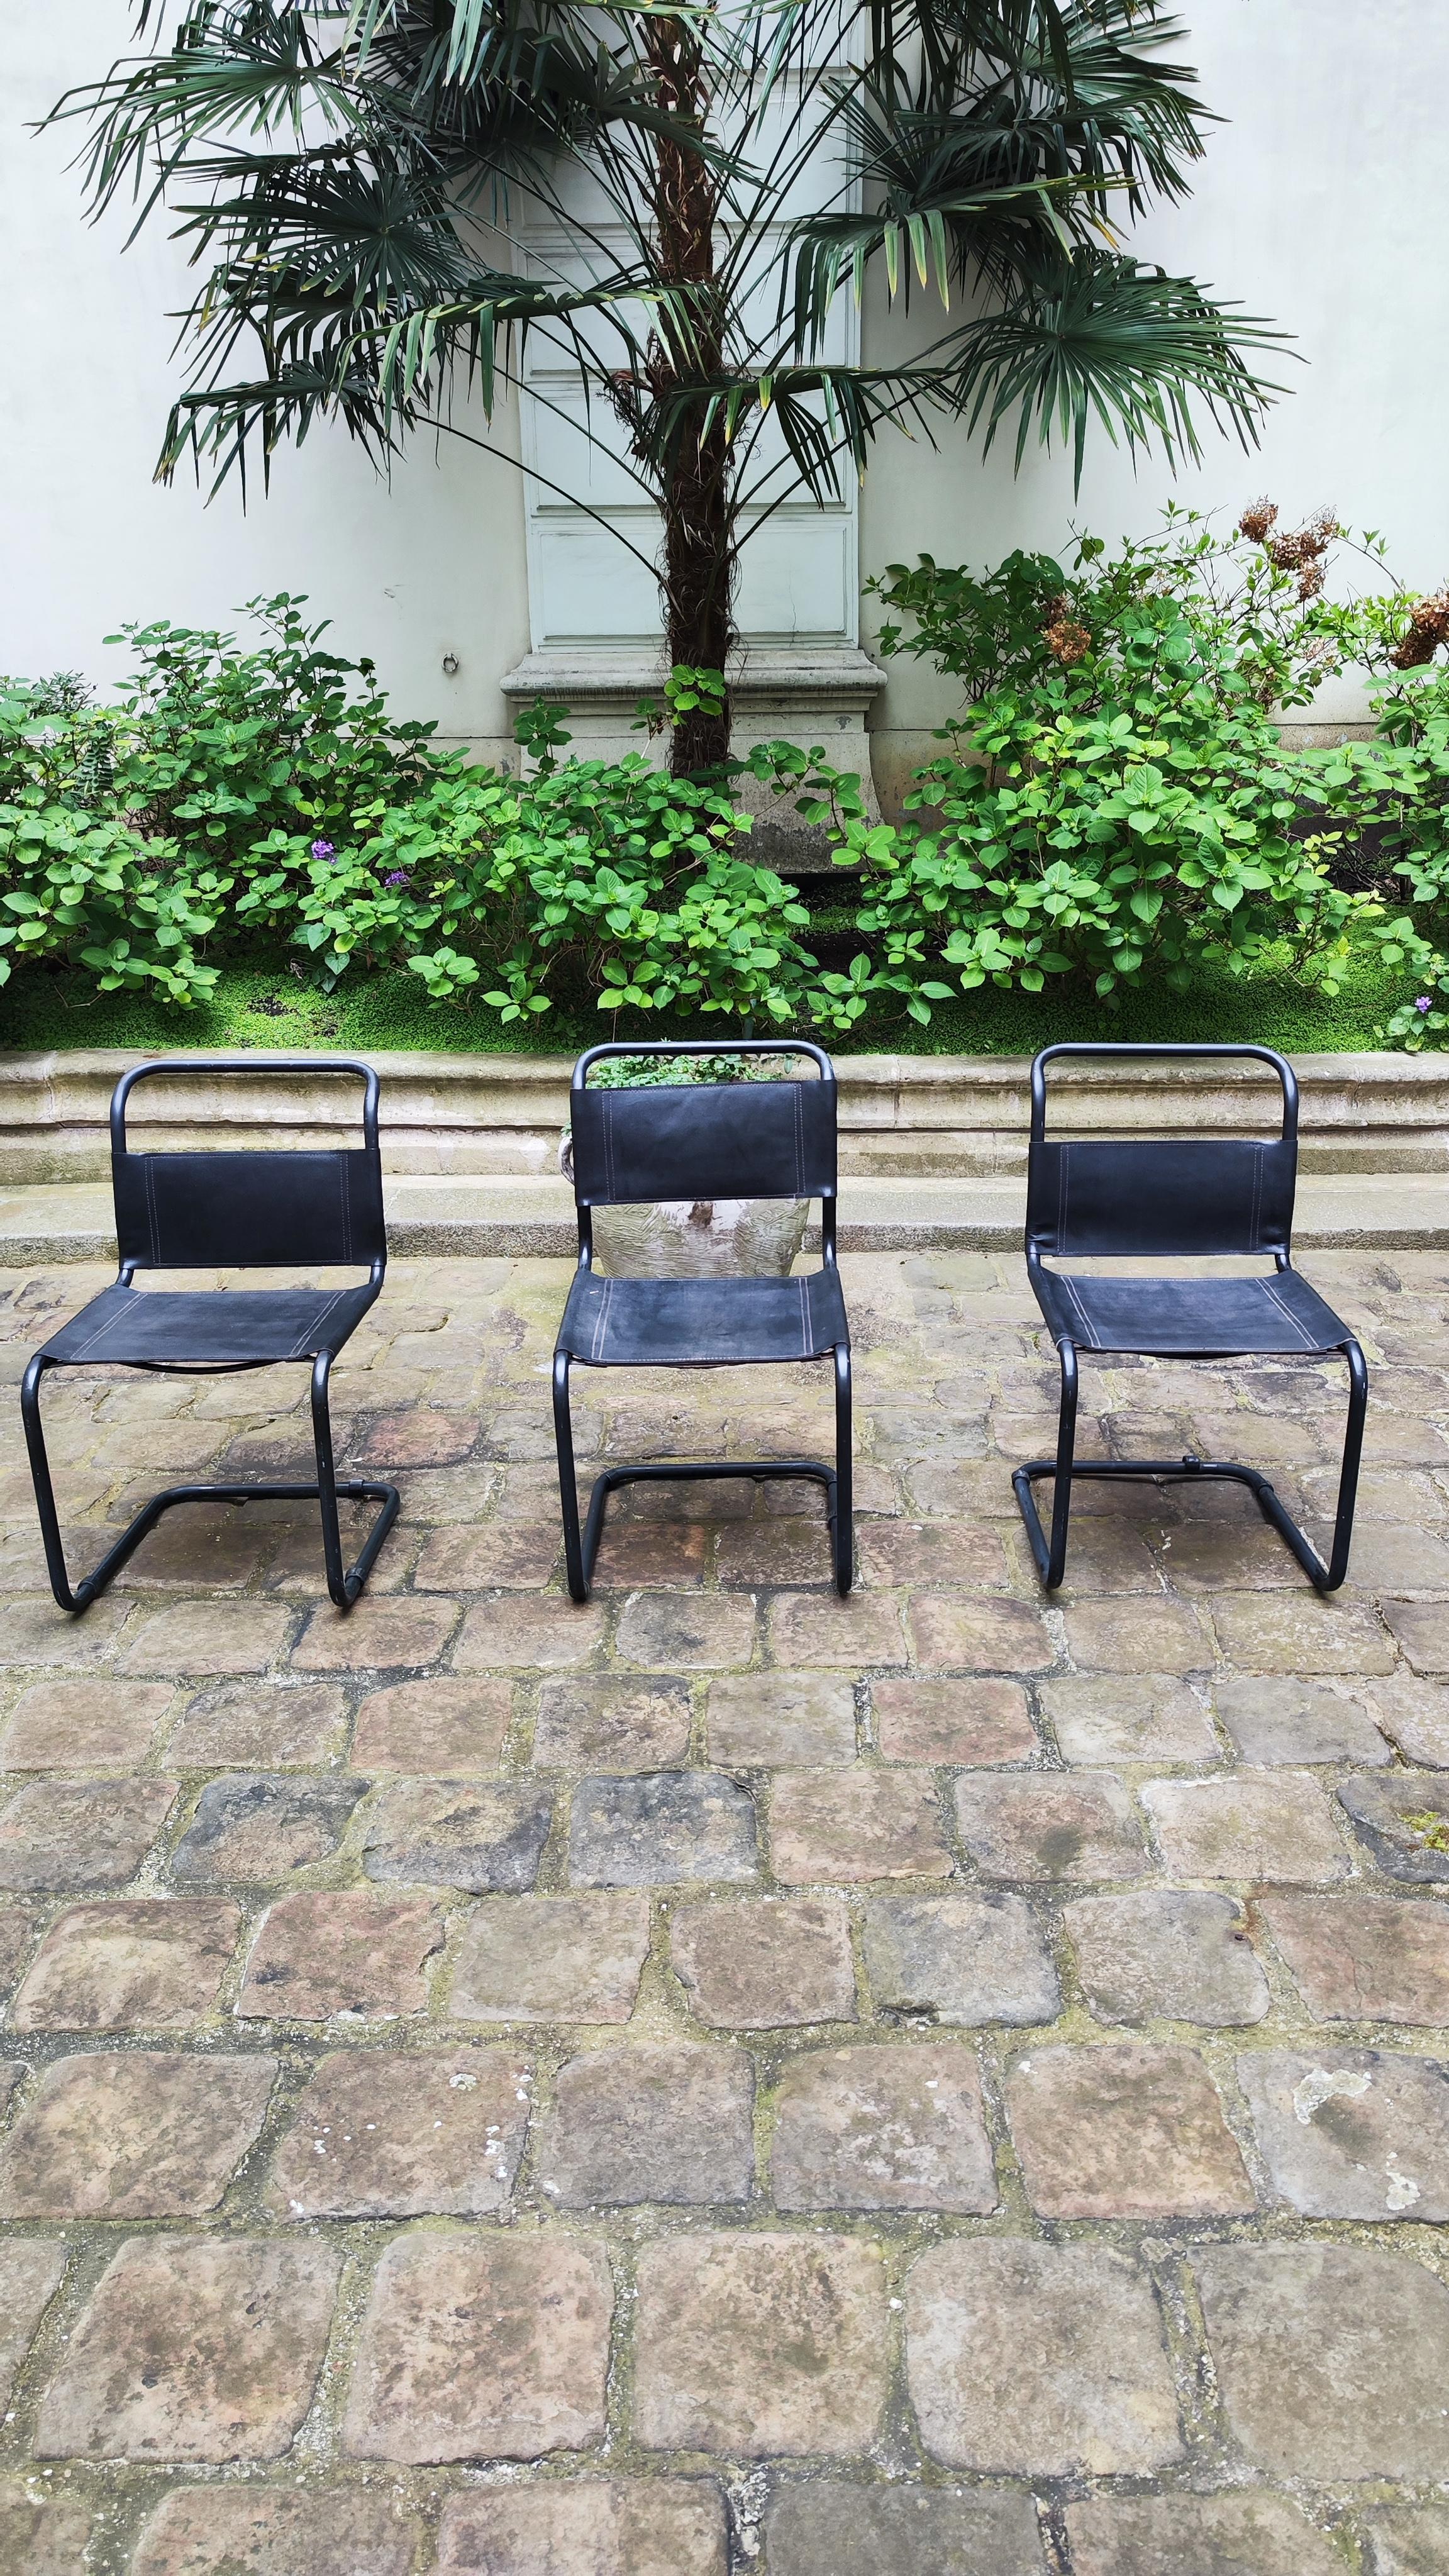 Steel 4 B33 MART STAM CANTILEVER CHAIRS AND 1 S34 ARMCHAIR - 80s  - 1980 For Sale